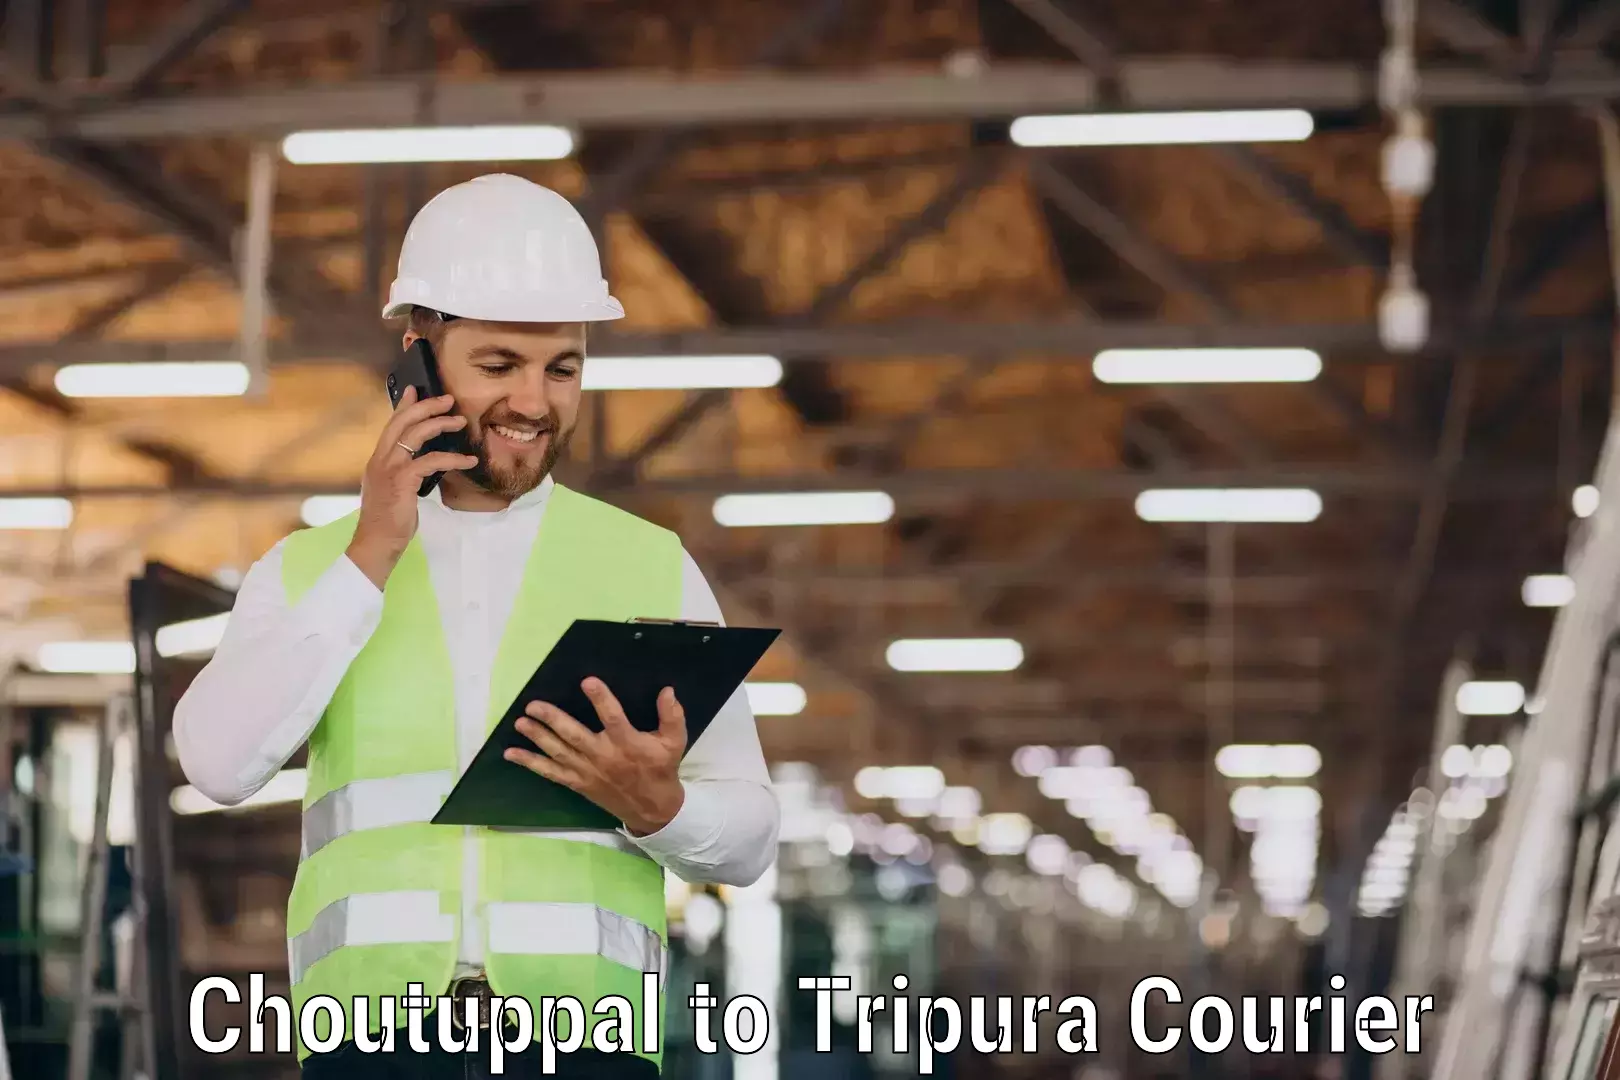 Multi-city courier Choutuppal to Udaipur Tripura